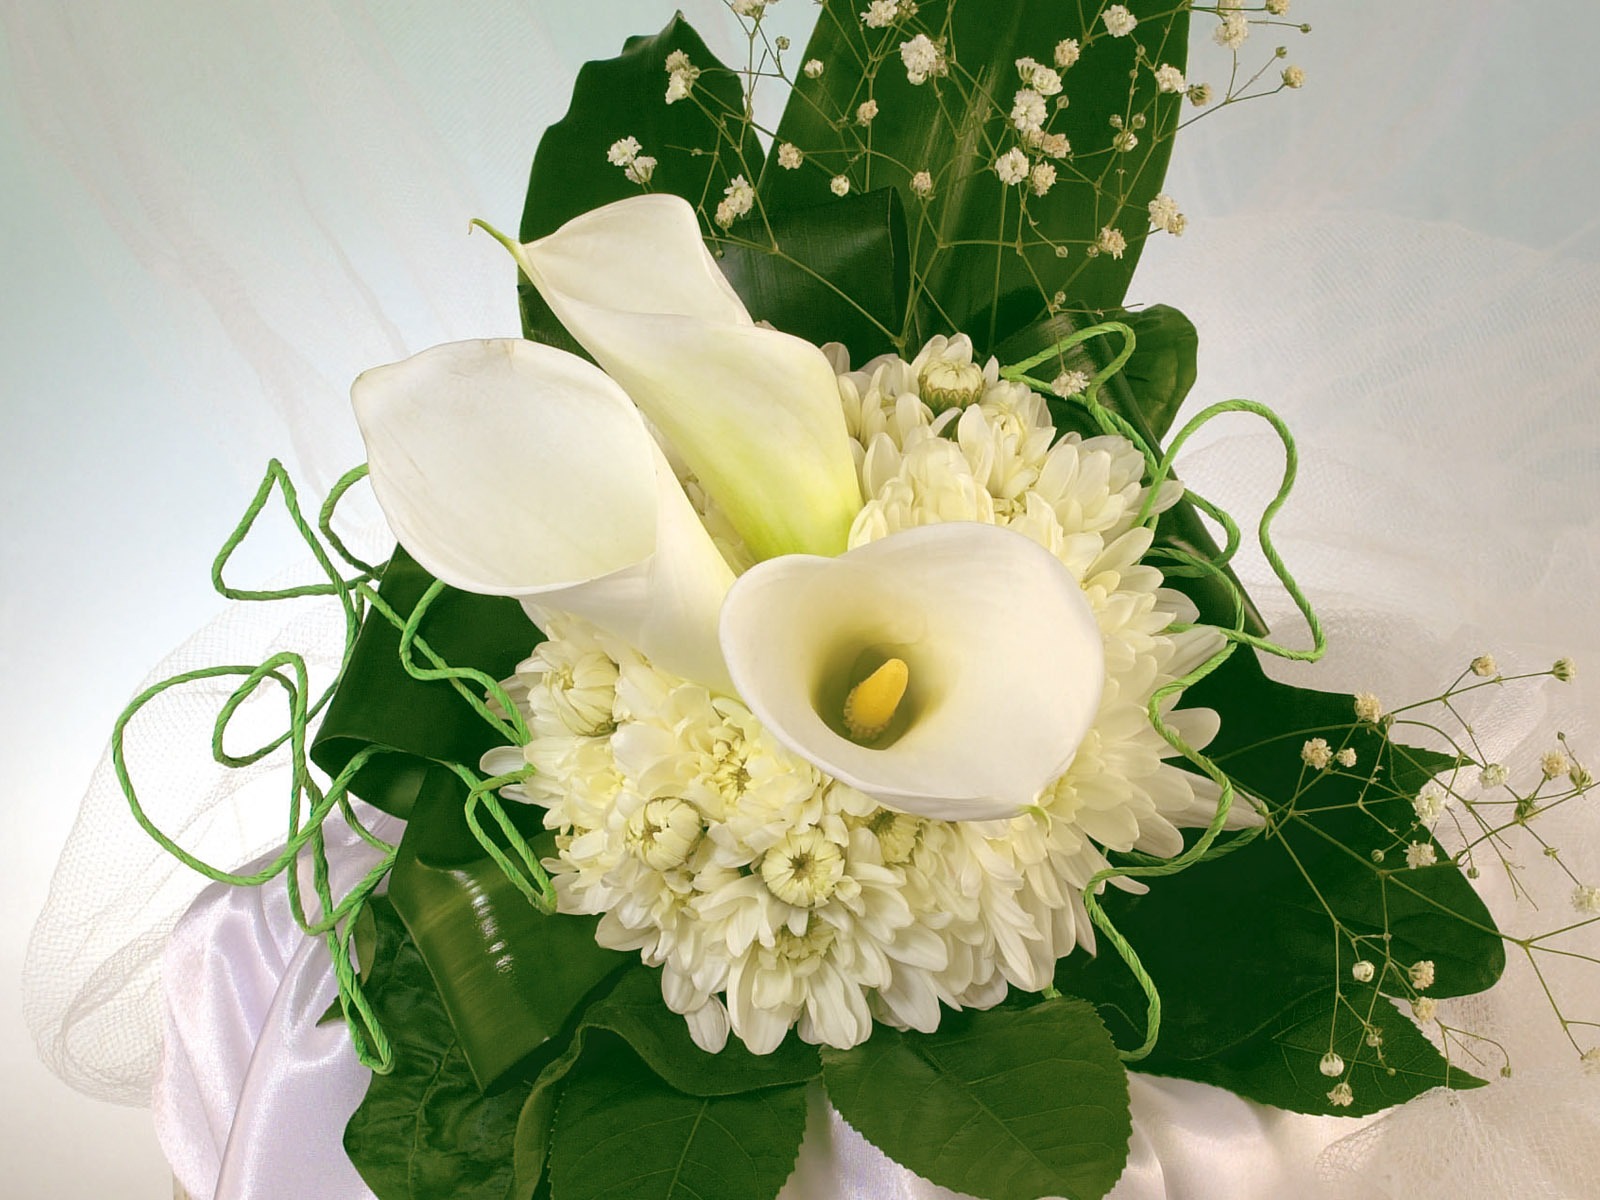 Weddings and Flowers wallpaper (1) #9 - 1600x1200